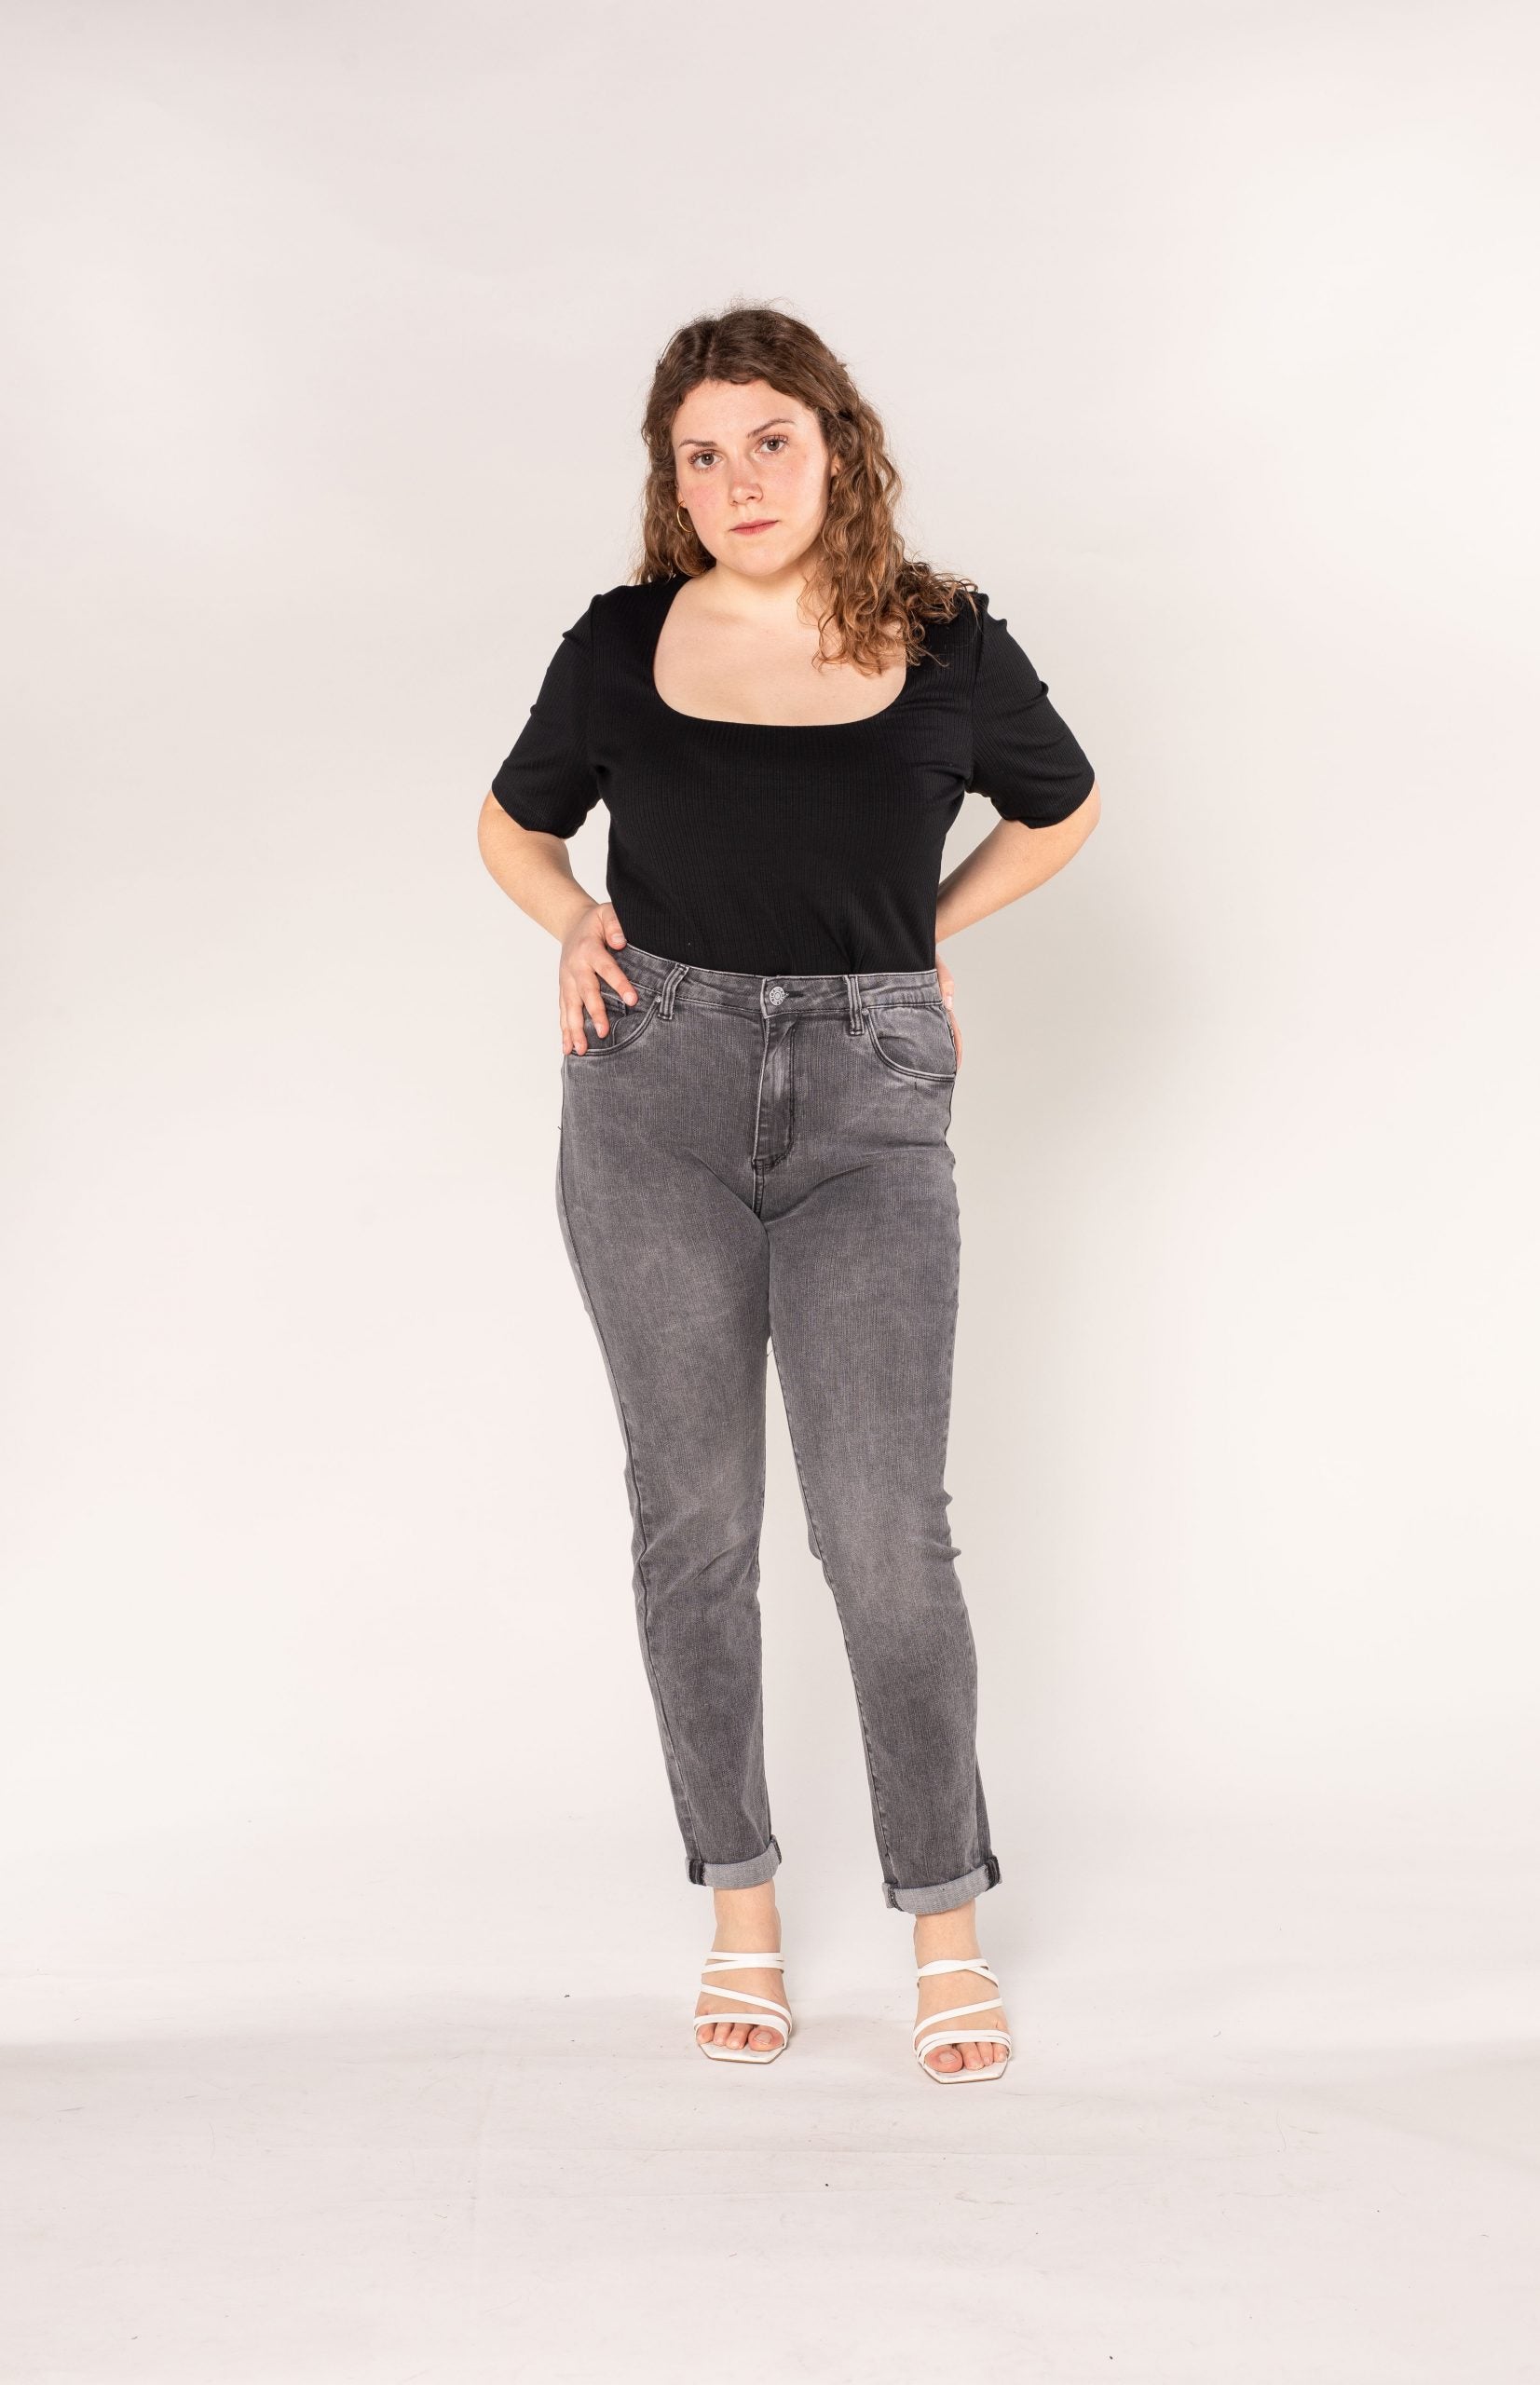 Wholesale Classic Grey High Waisted Plus Size Jeans – G - Look Fashion Ltd.  trading as Jeans Gems Wholesale